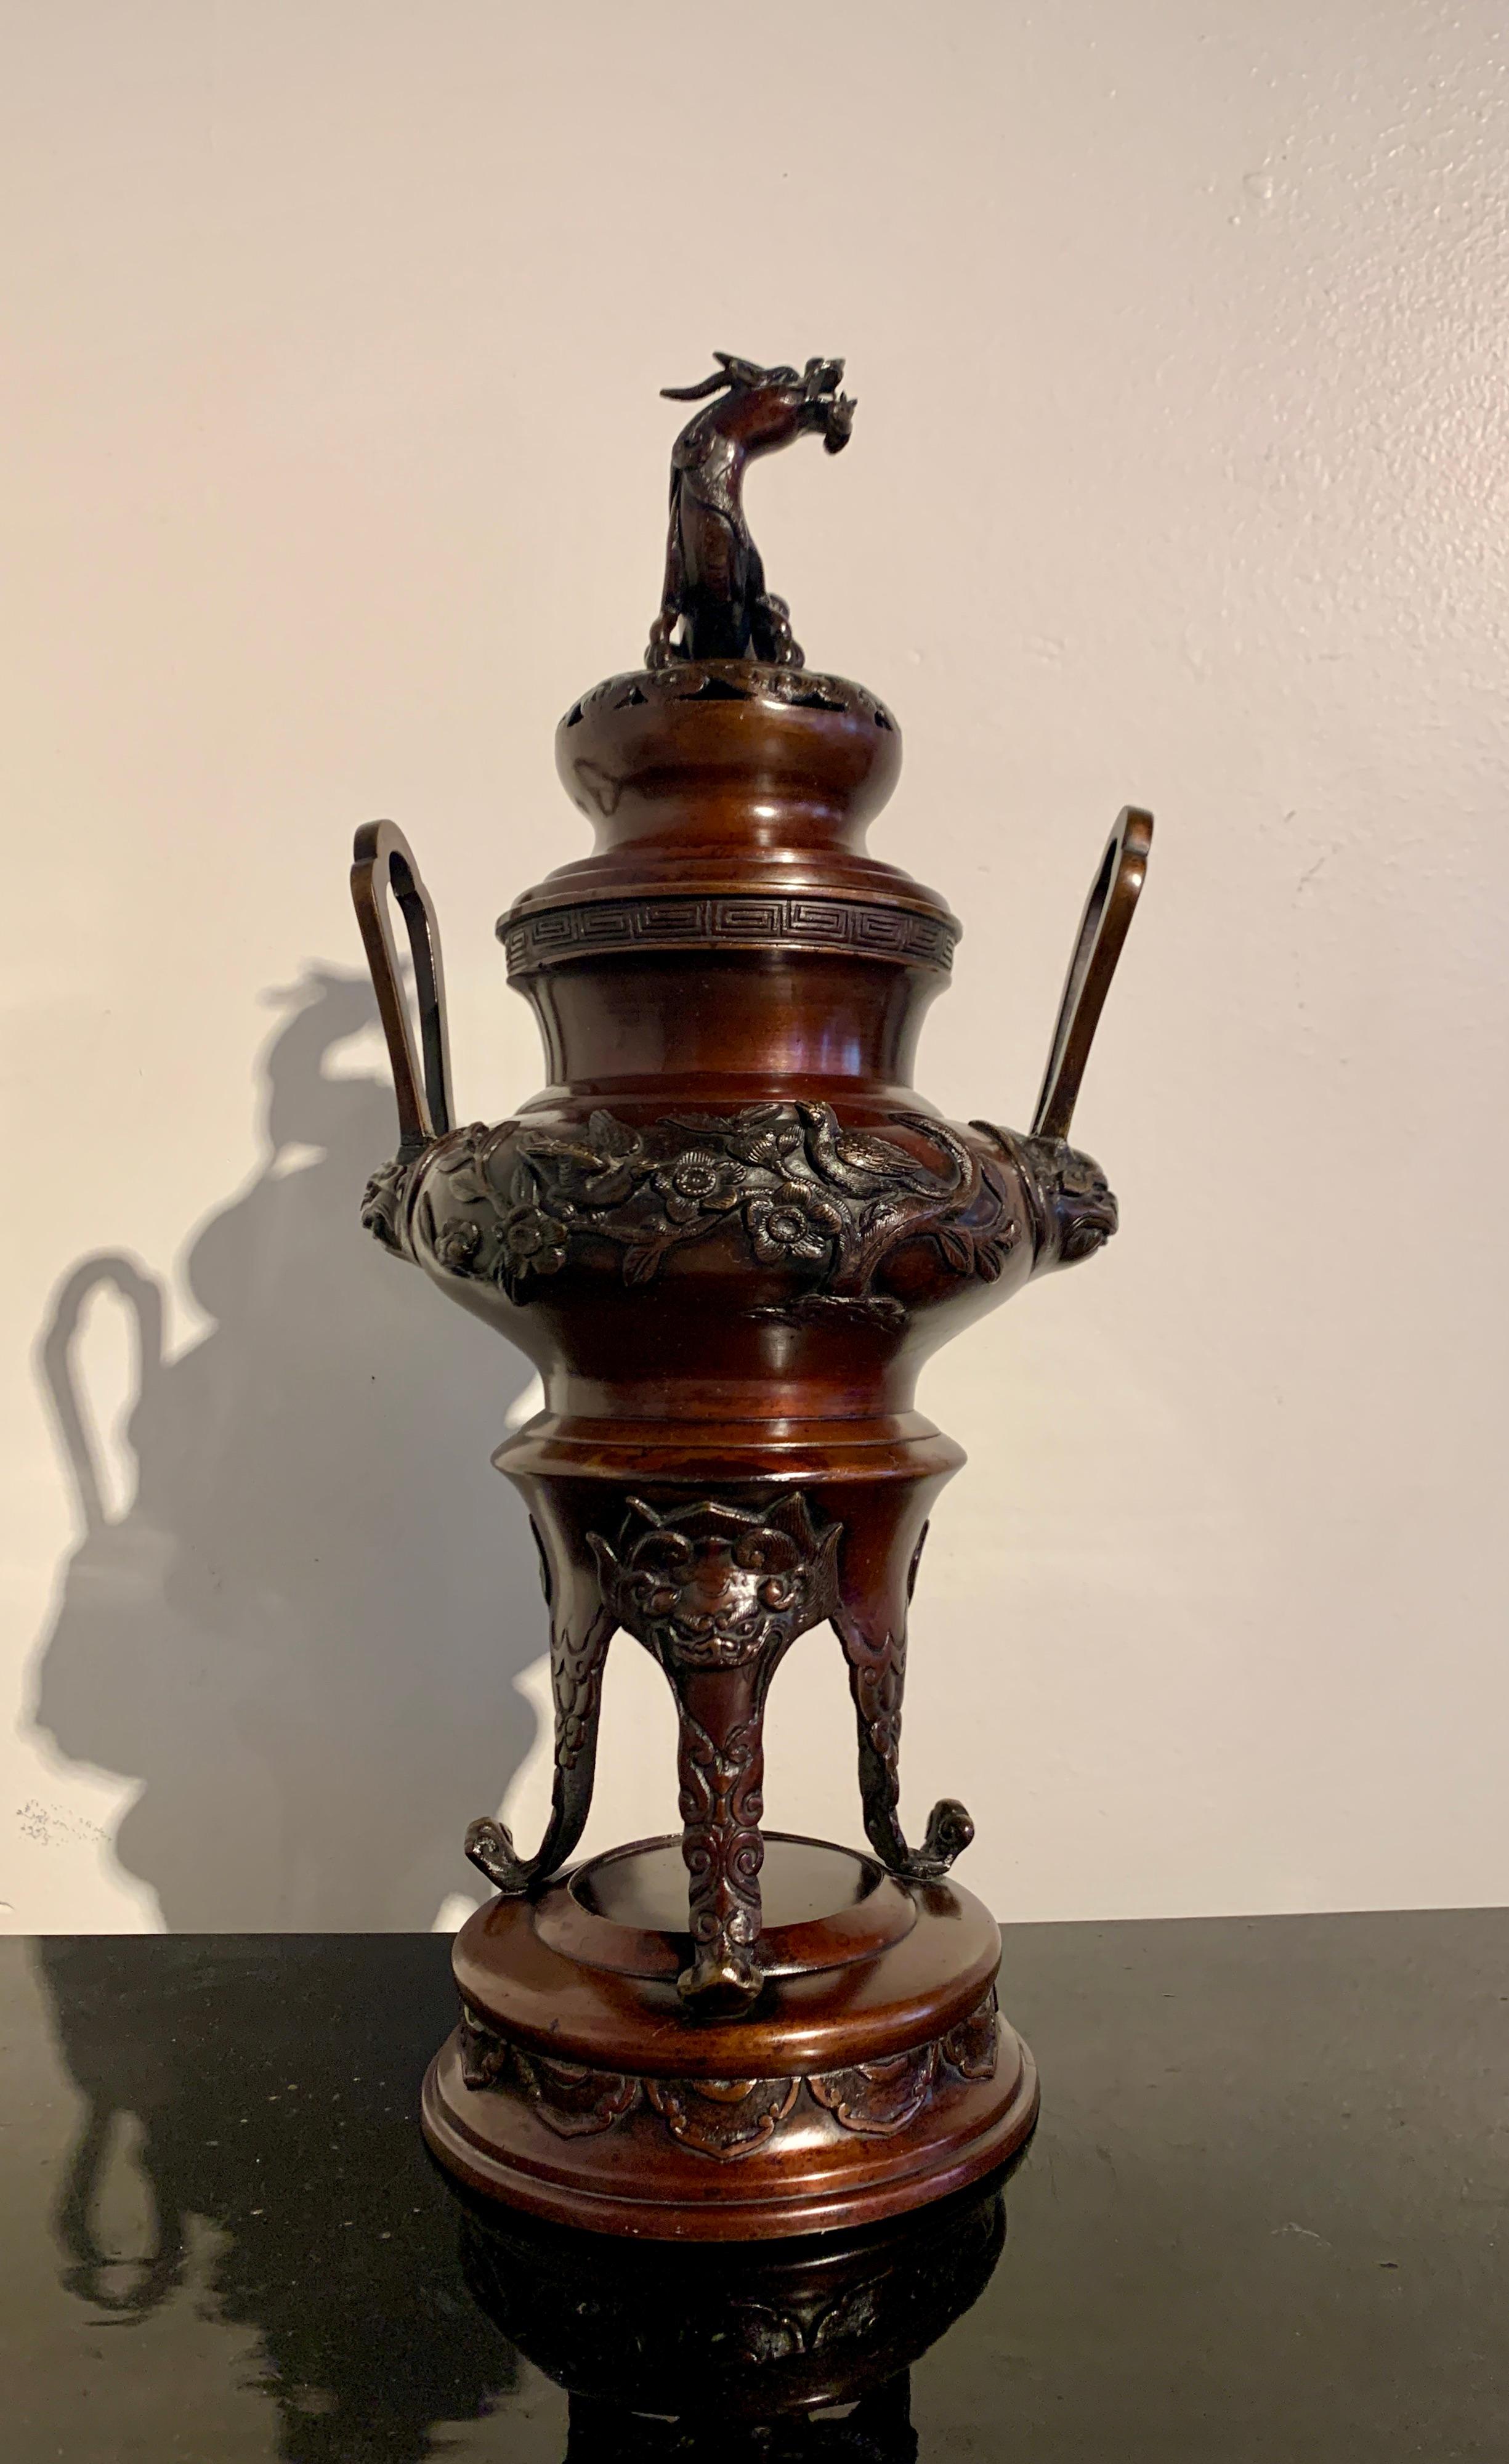 An elegant Japanese cast and lacquered bronze incense burner, koro, topped with a mythical kirin, Taisho Period, circa 1920, Japan.

The tall koro of tripod form, with three elegant legs with outward curved feet resting on an integral circular